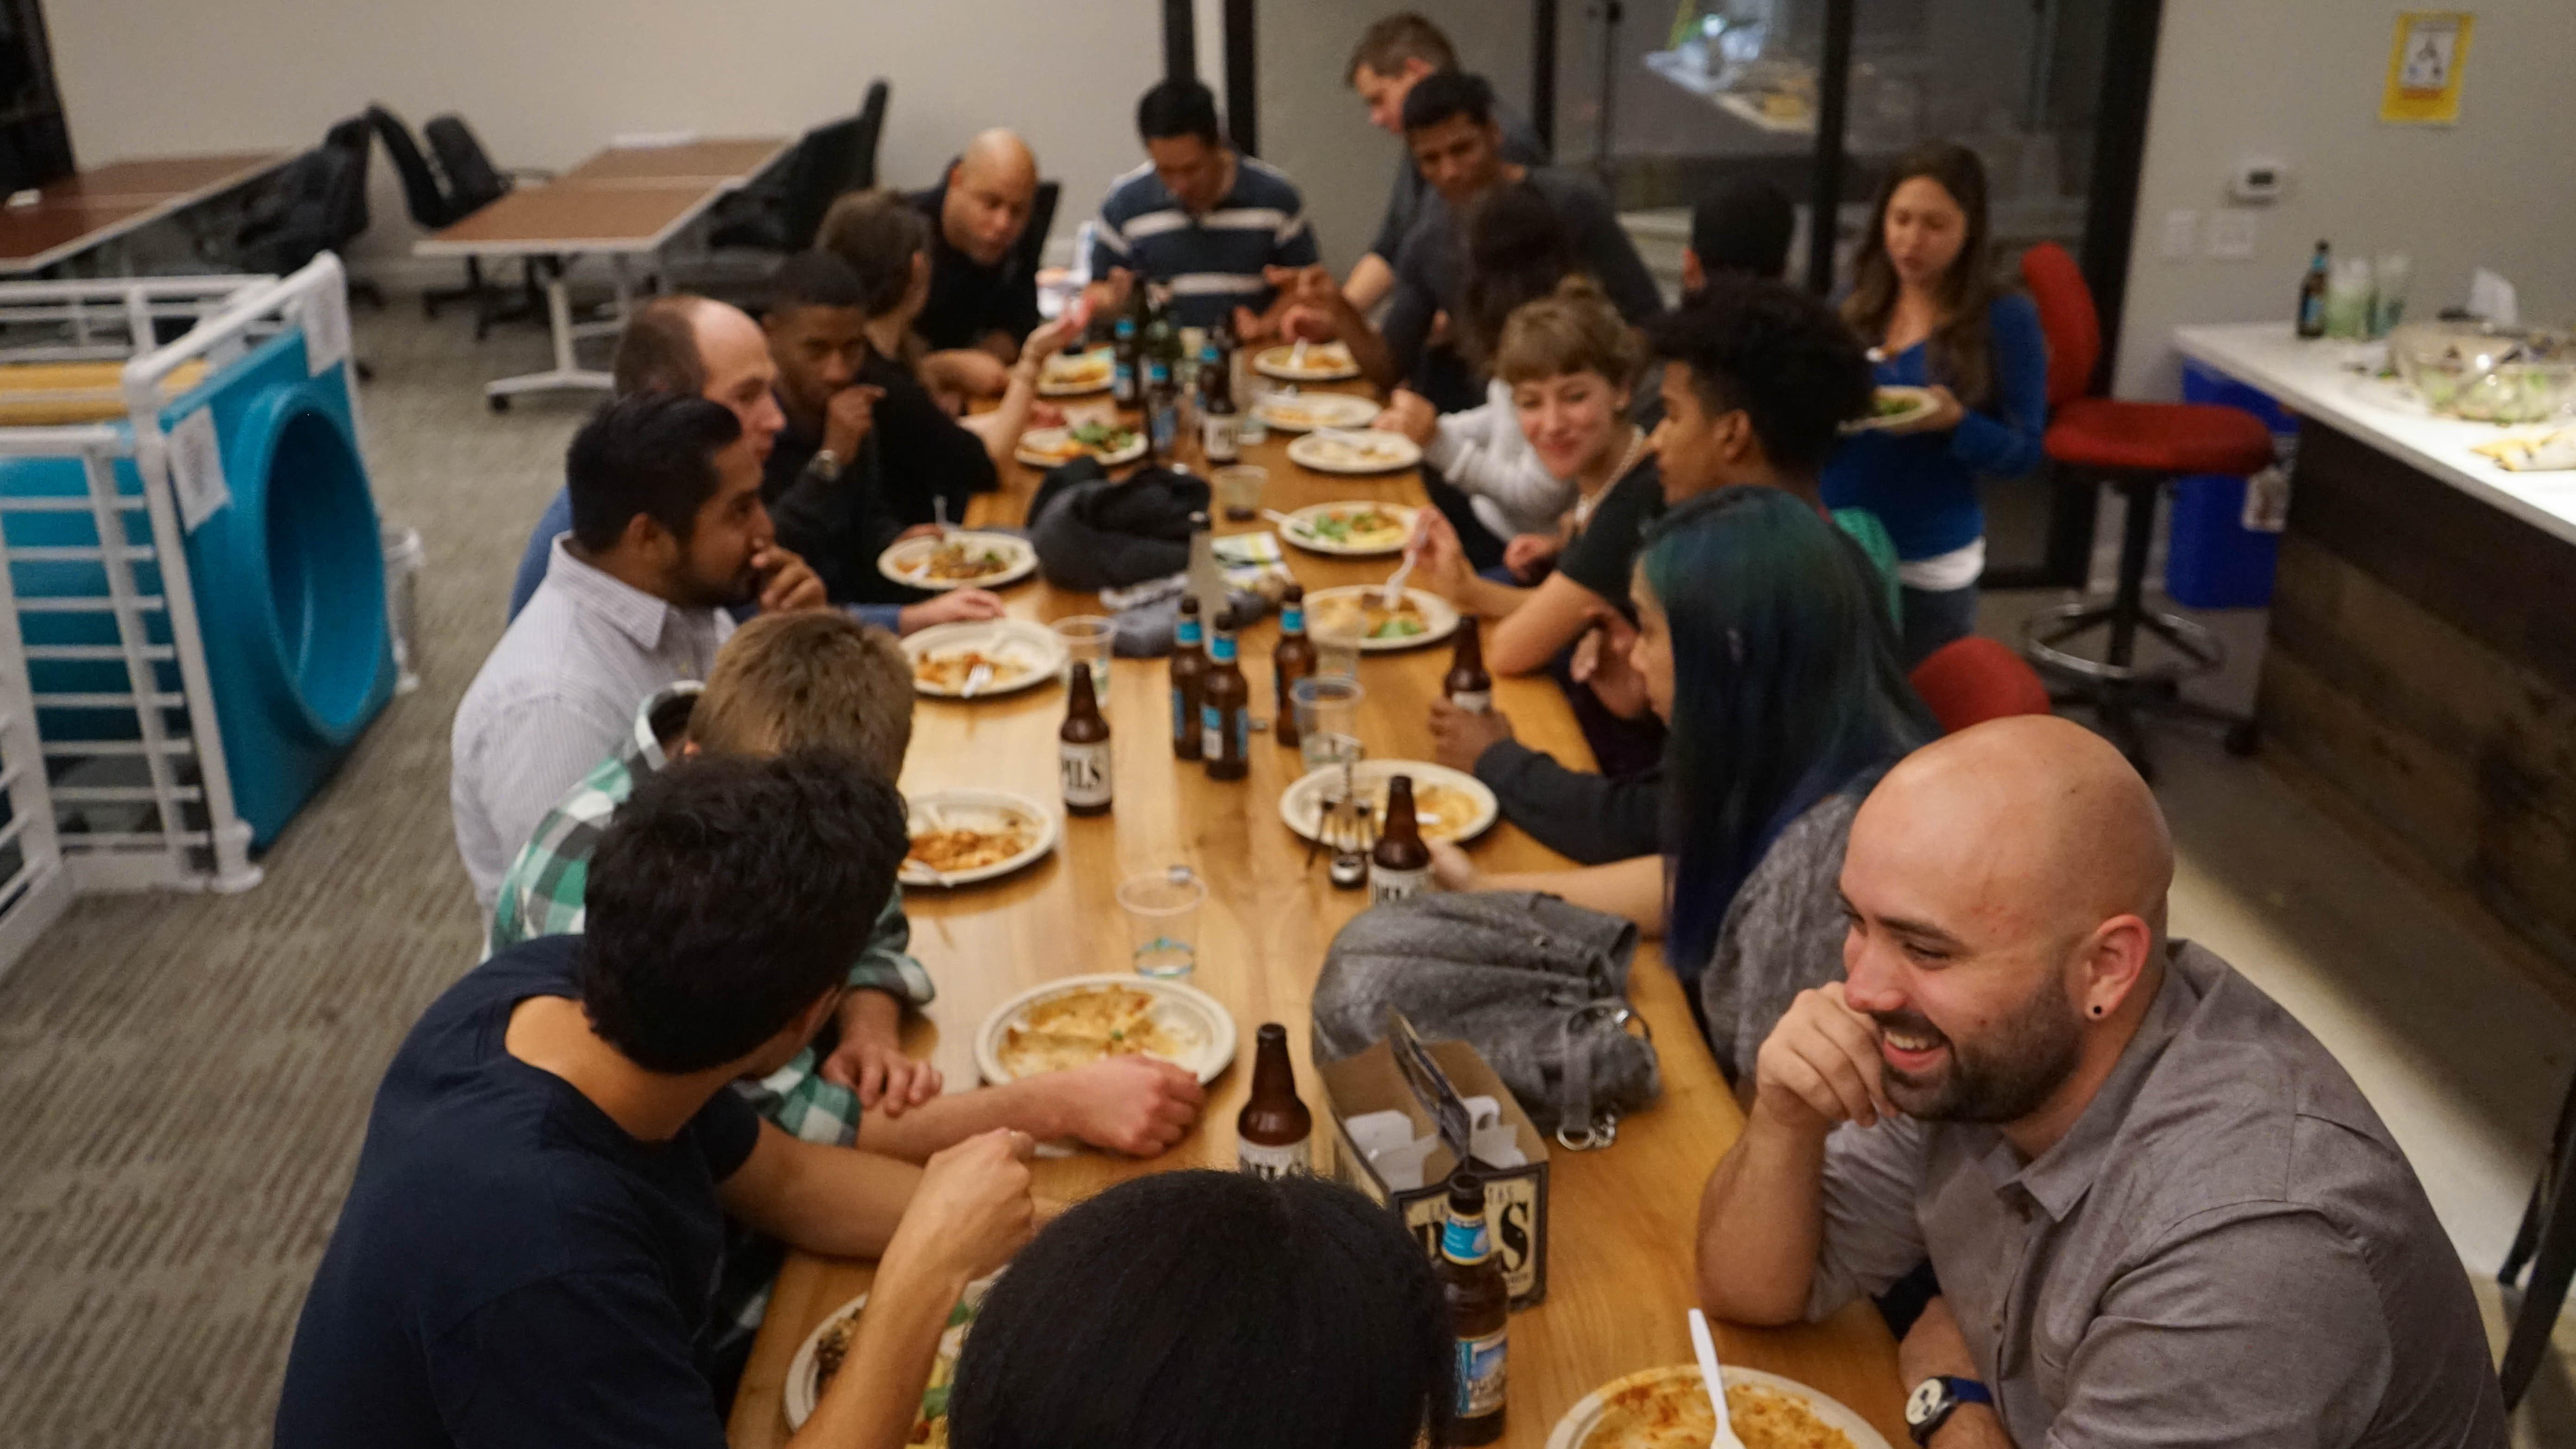 A recent Wednesday community dinner at Clef, a data security startup in Oakland.